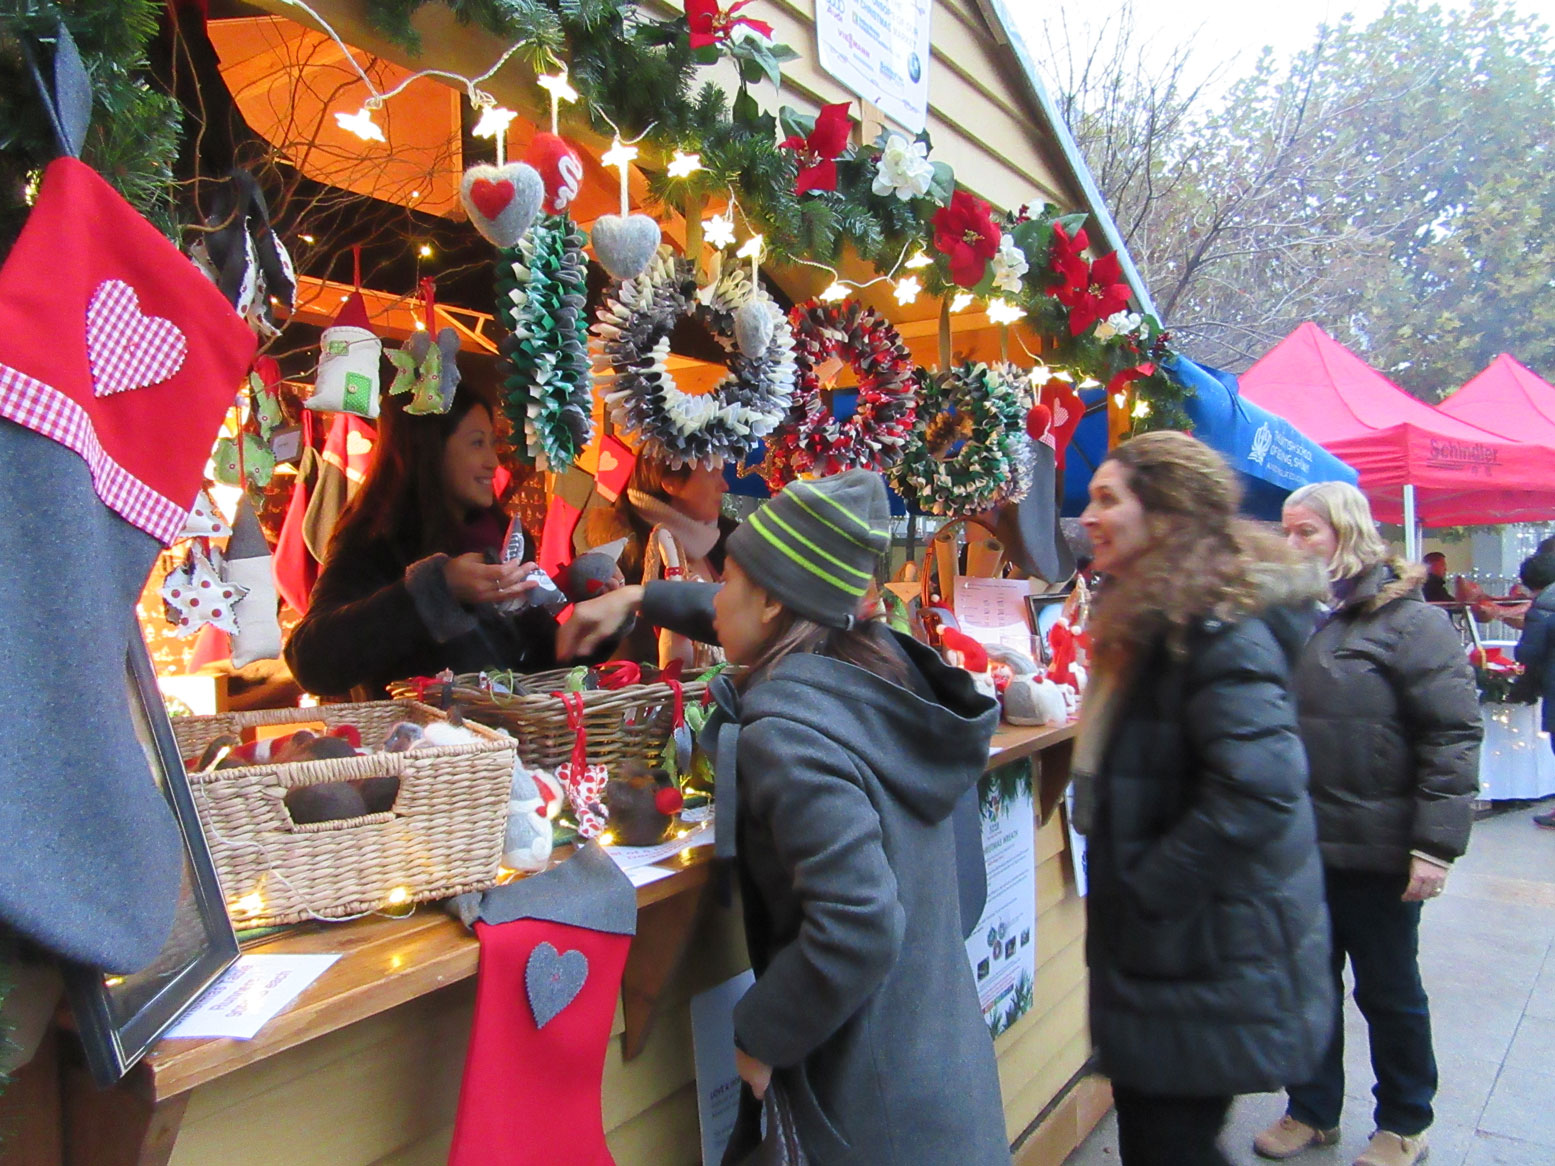 Source Your Christmas Present Gift List at These Christmas Fairs and Markets